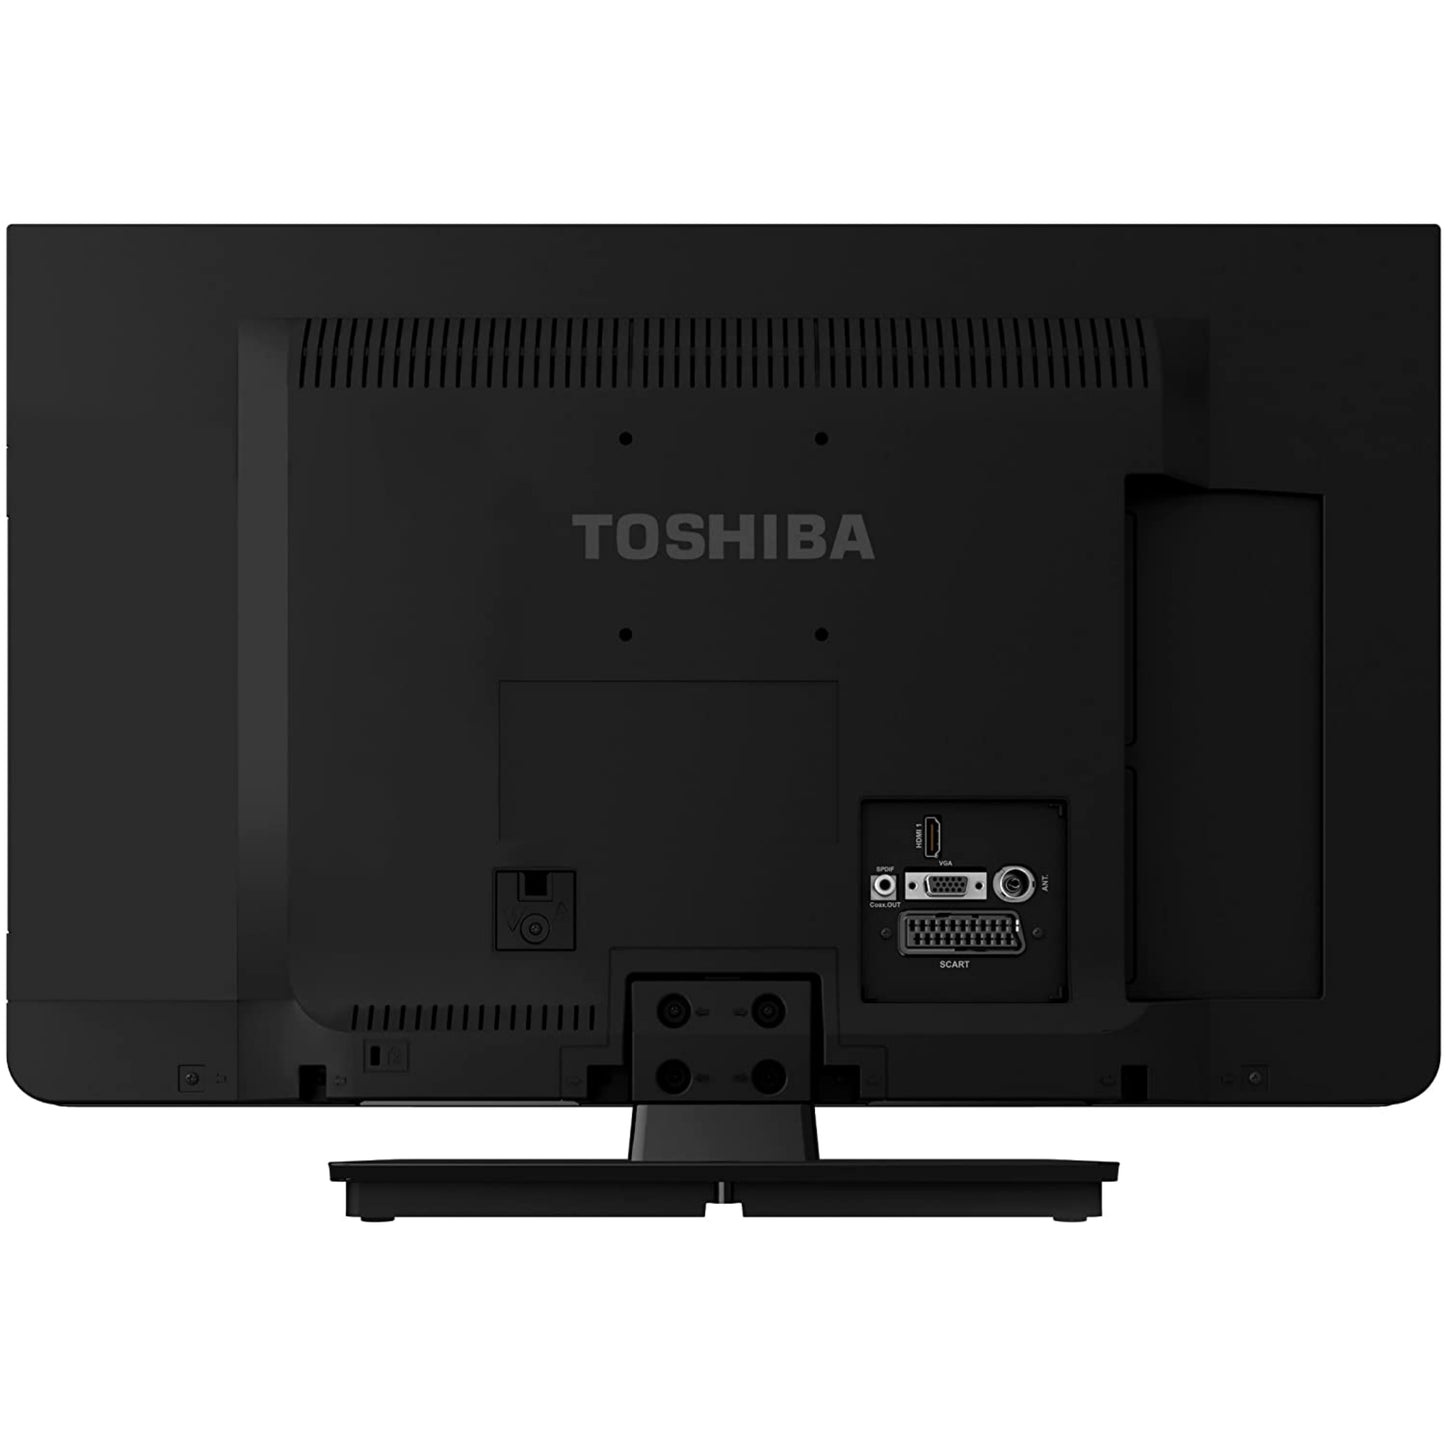 Back View of Small Toshiba LED TV